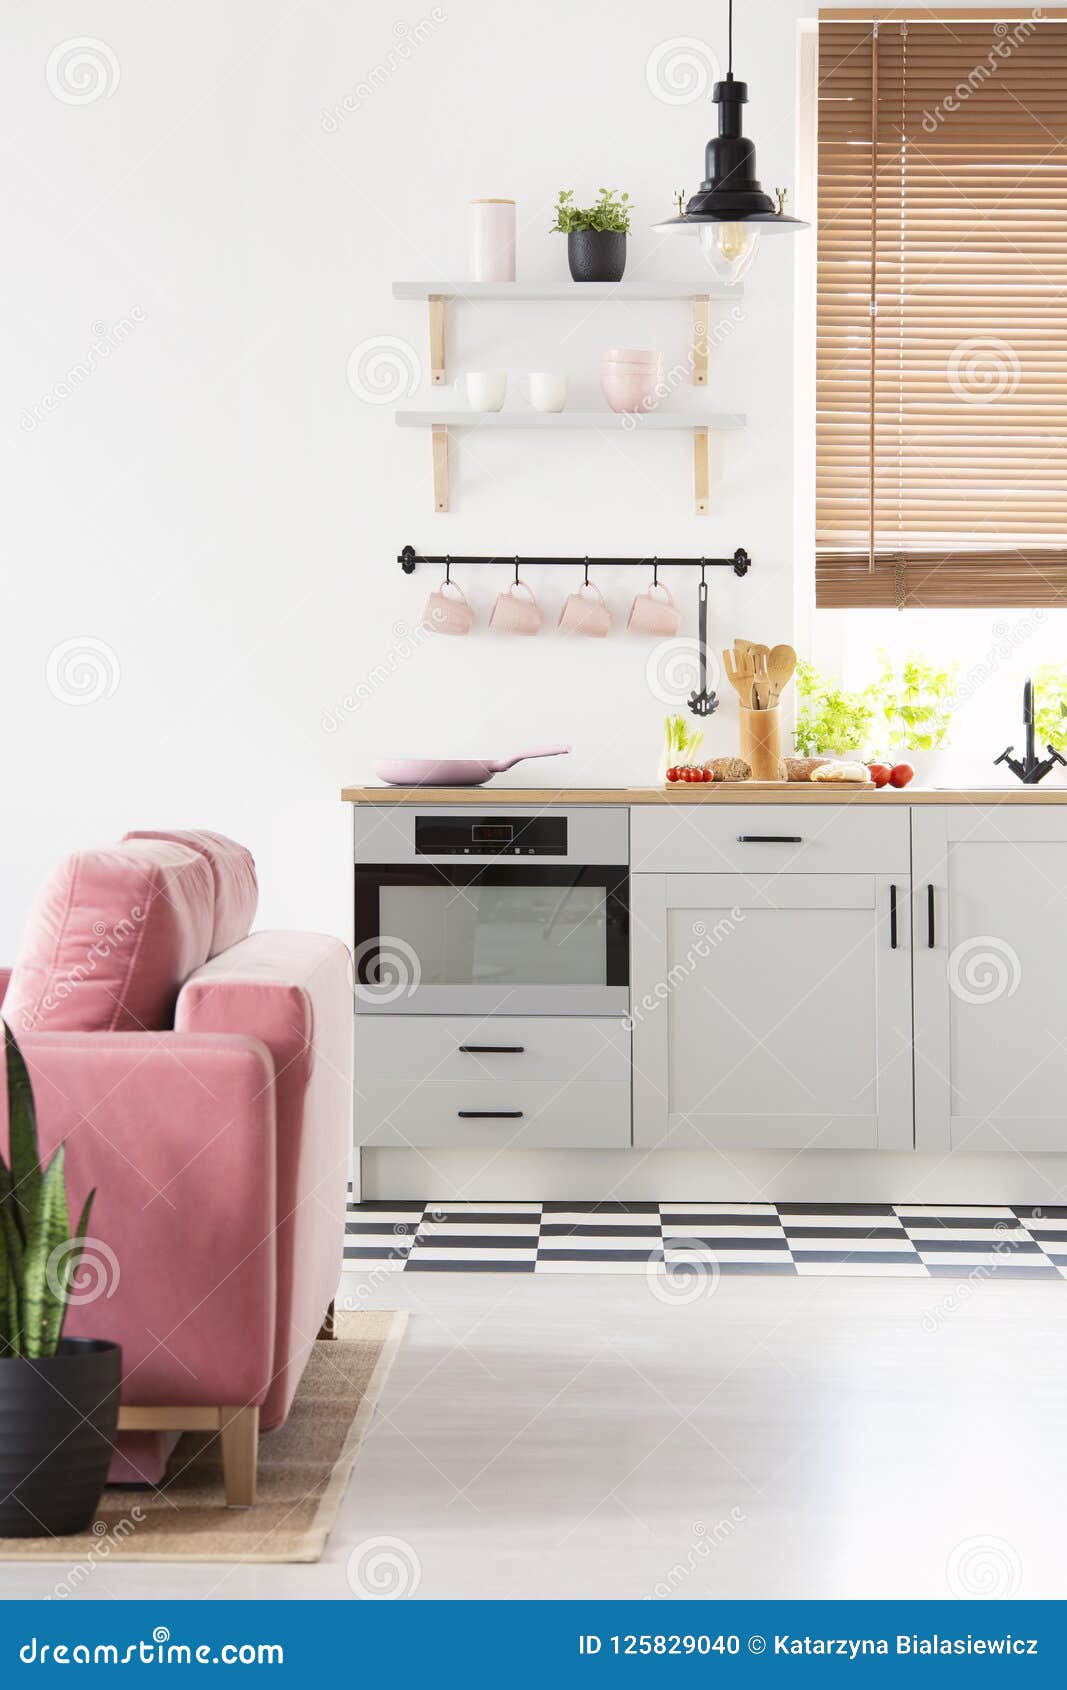 black lamp above grey kitchenette in open space interior with pink sofa and window. real photo